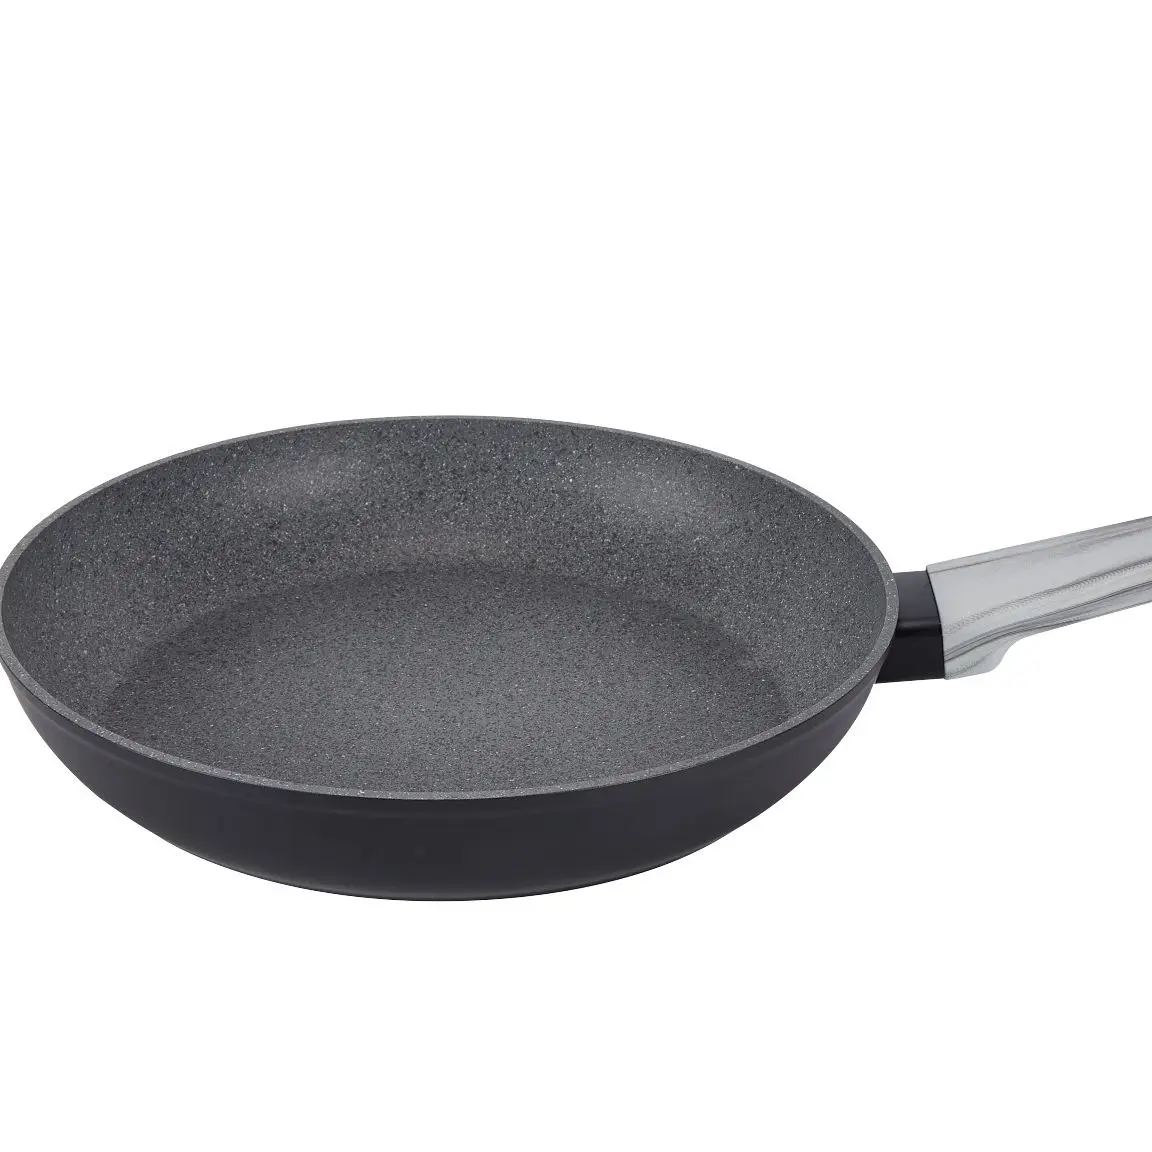 

New Cheap Price Oem Style Series Aluminium Alloy Tefal Frying Pan Hole Induction Bottom Fry Pan